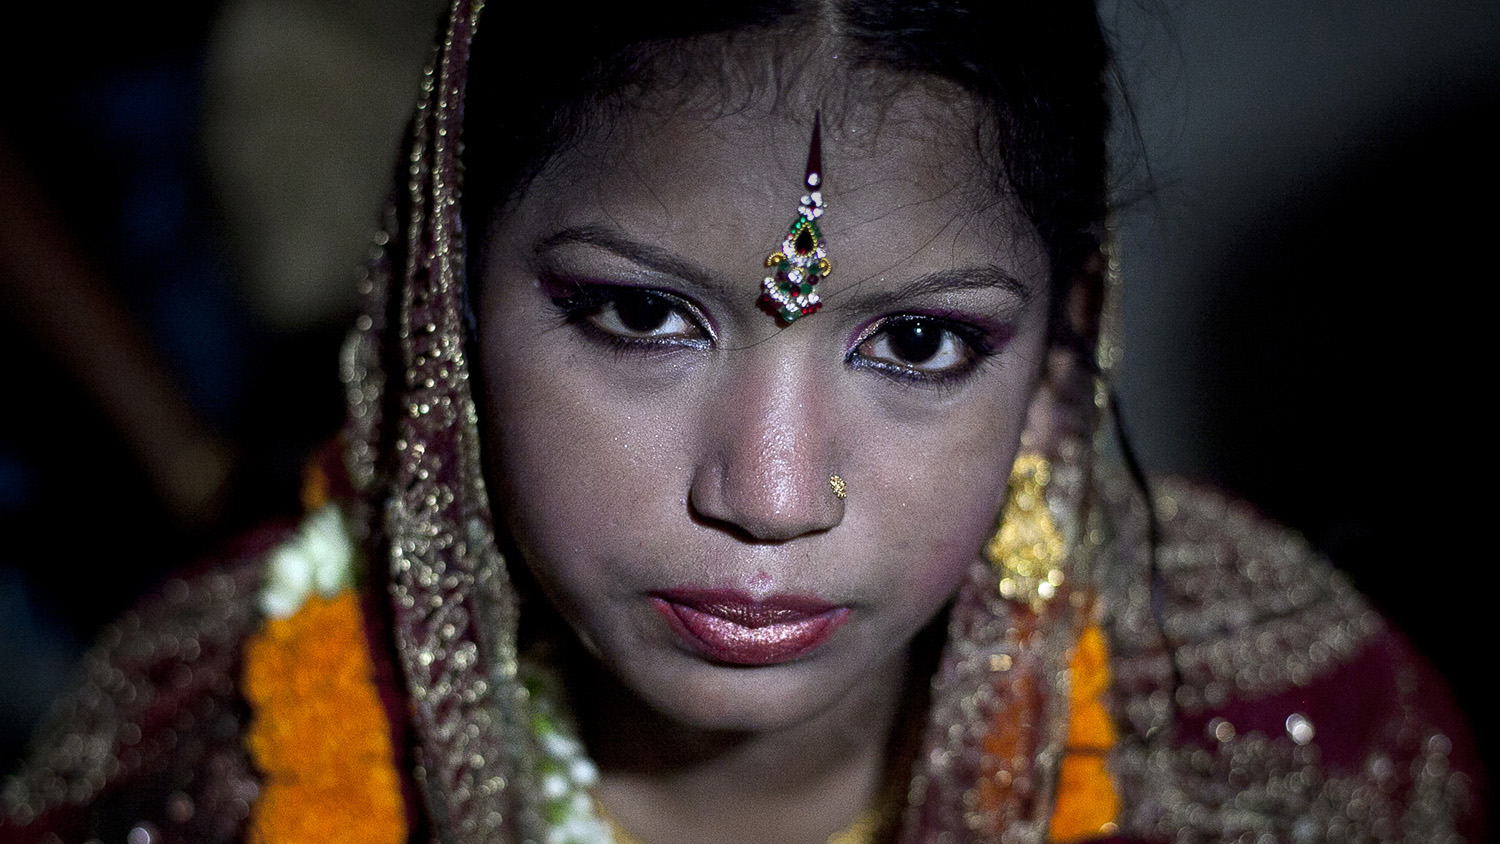 13 year old Runa Akhter is seen the day of her wedding to a 29 year old man August 29, 2014 in Manikganj, Bangladesh. Runa was in the 7th grade, and loved reading, sports and traveling. She wanted to wait until she was 21 to get married but, "No boy want's to marry a girl older than 18 in my village" she said. In June of this year, Human Rights Watch released a damning report about child marriage in Bangladesh. The country has one of the highest rates of child marriage in the world, with 29% of girls marrying before the age of 15, and 65% of girls marrying before they turn 18. The detrimental effects of early marriage on a girl cannot be overstated. Most young brides drop out of school. Pregnant girls from 15-20 are twice as likely to die in childbirth than those 20 or older, while girls under 15 are at five times the risk. Research cites spousal age difference as a significant risk factor for violence and sexual abuse. Child marriage is attributed to both cultural tradition and poverty. Parents believe that it "protects" girls from sexual assault and harassment. Larger  dowries are not required for young girls, and economically, women's earnings are insignificant as compared to men's.